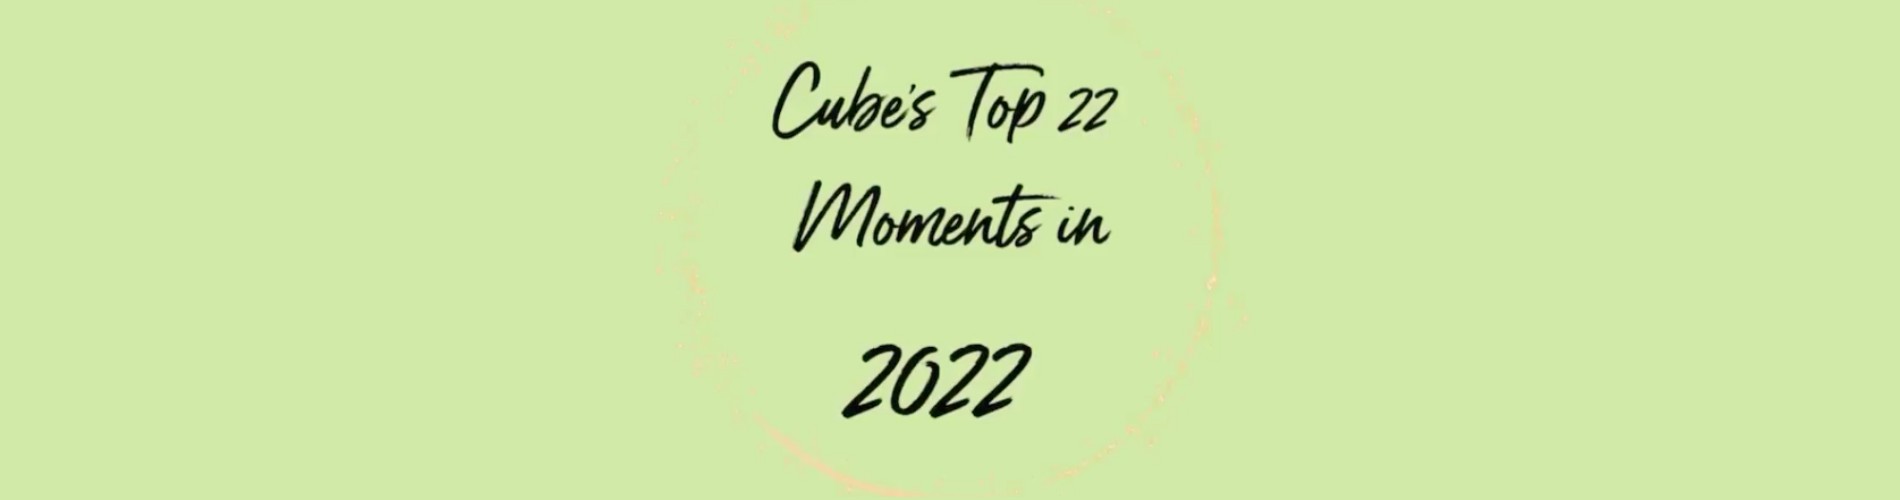 Cube’s Top 22 moments in 2022